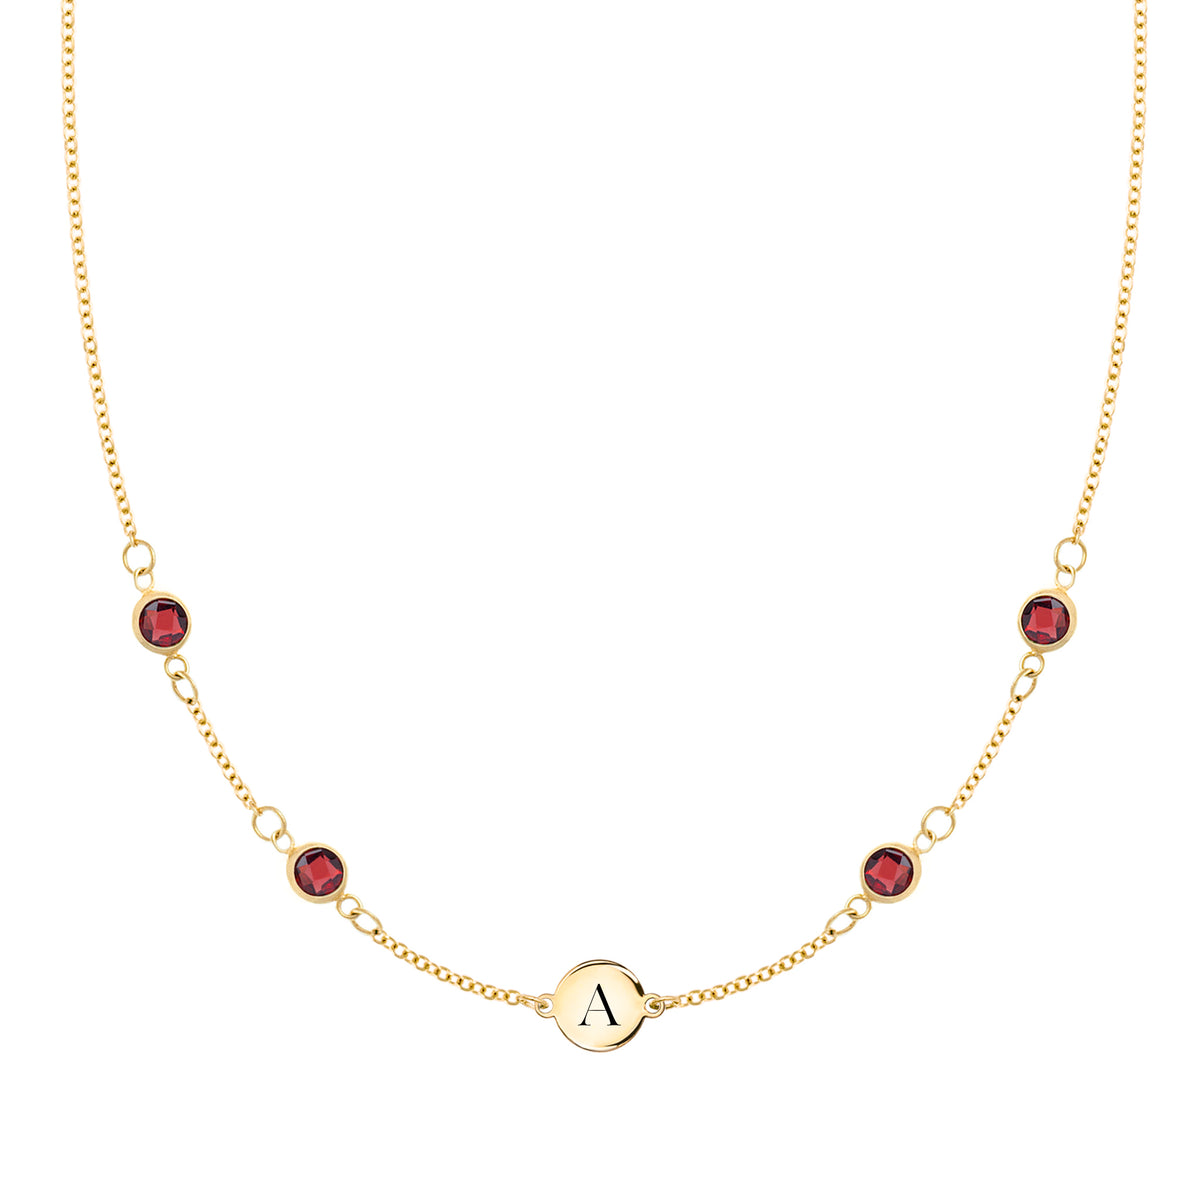 Personalized Classic 1 Letter & 4 Garnet Necklace in 14k Gold (January)